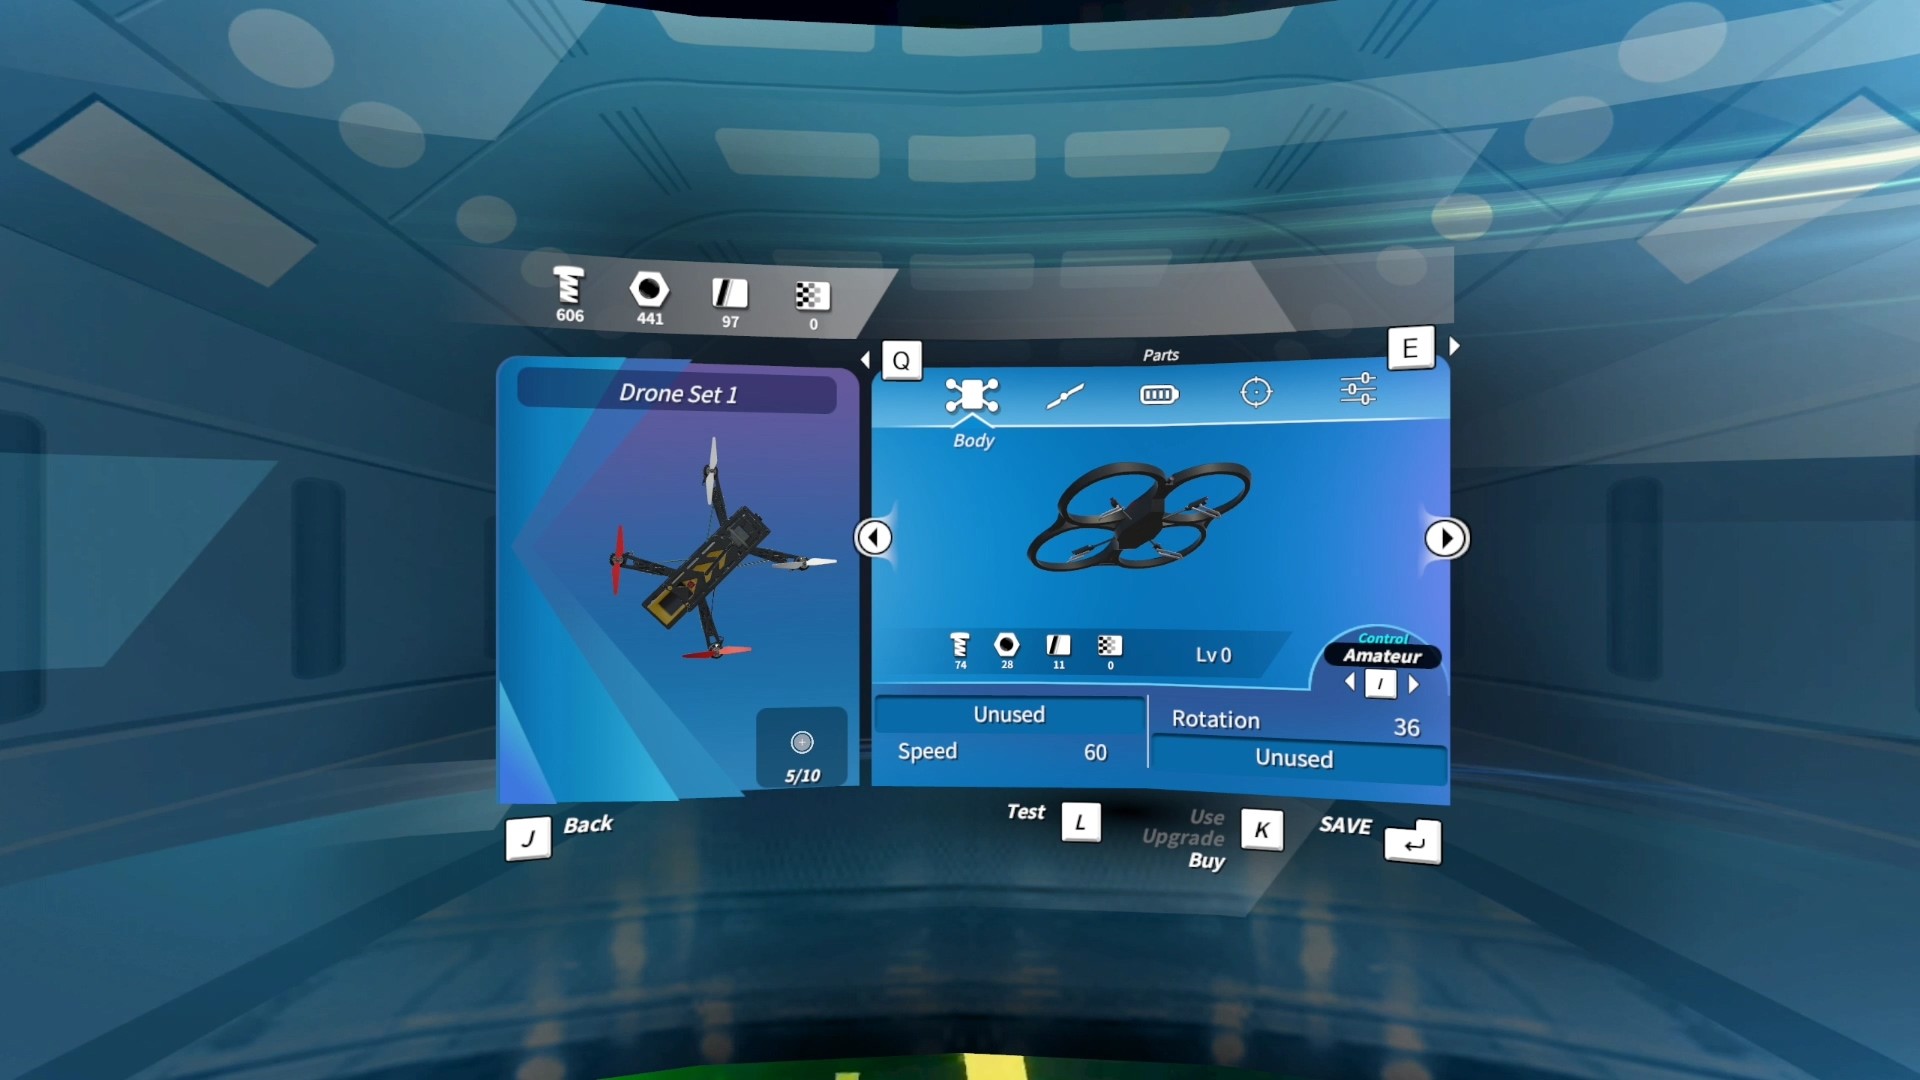 Drone Racer Free Download